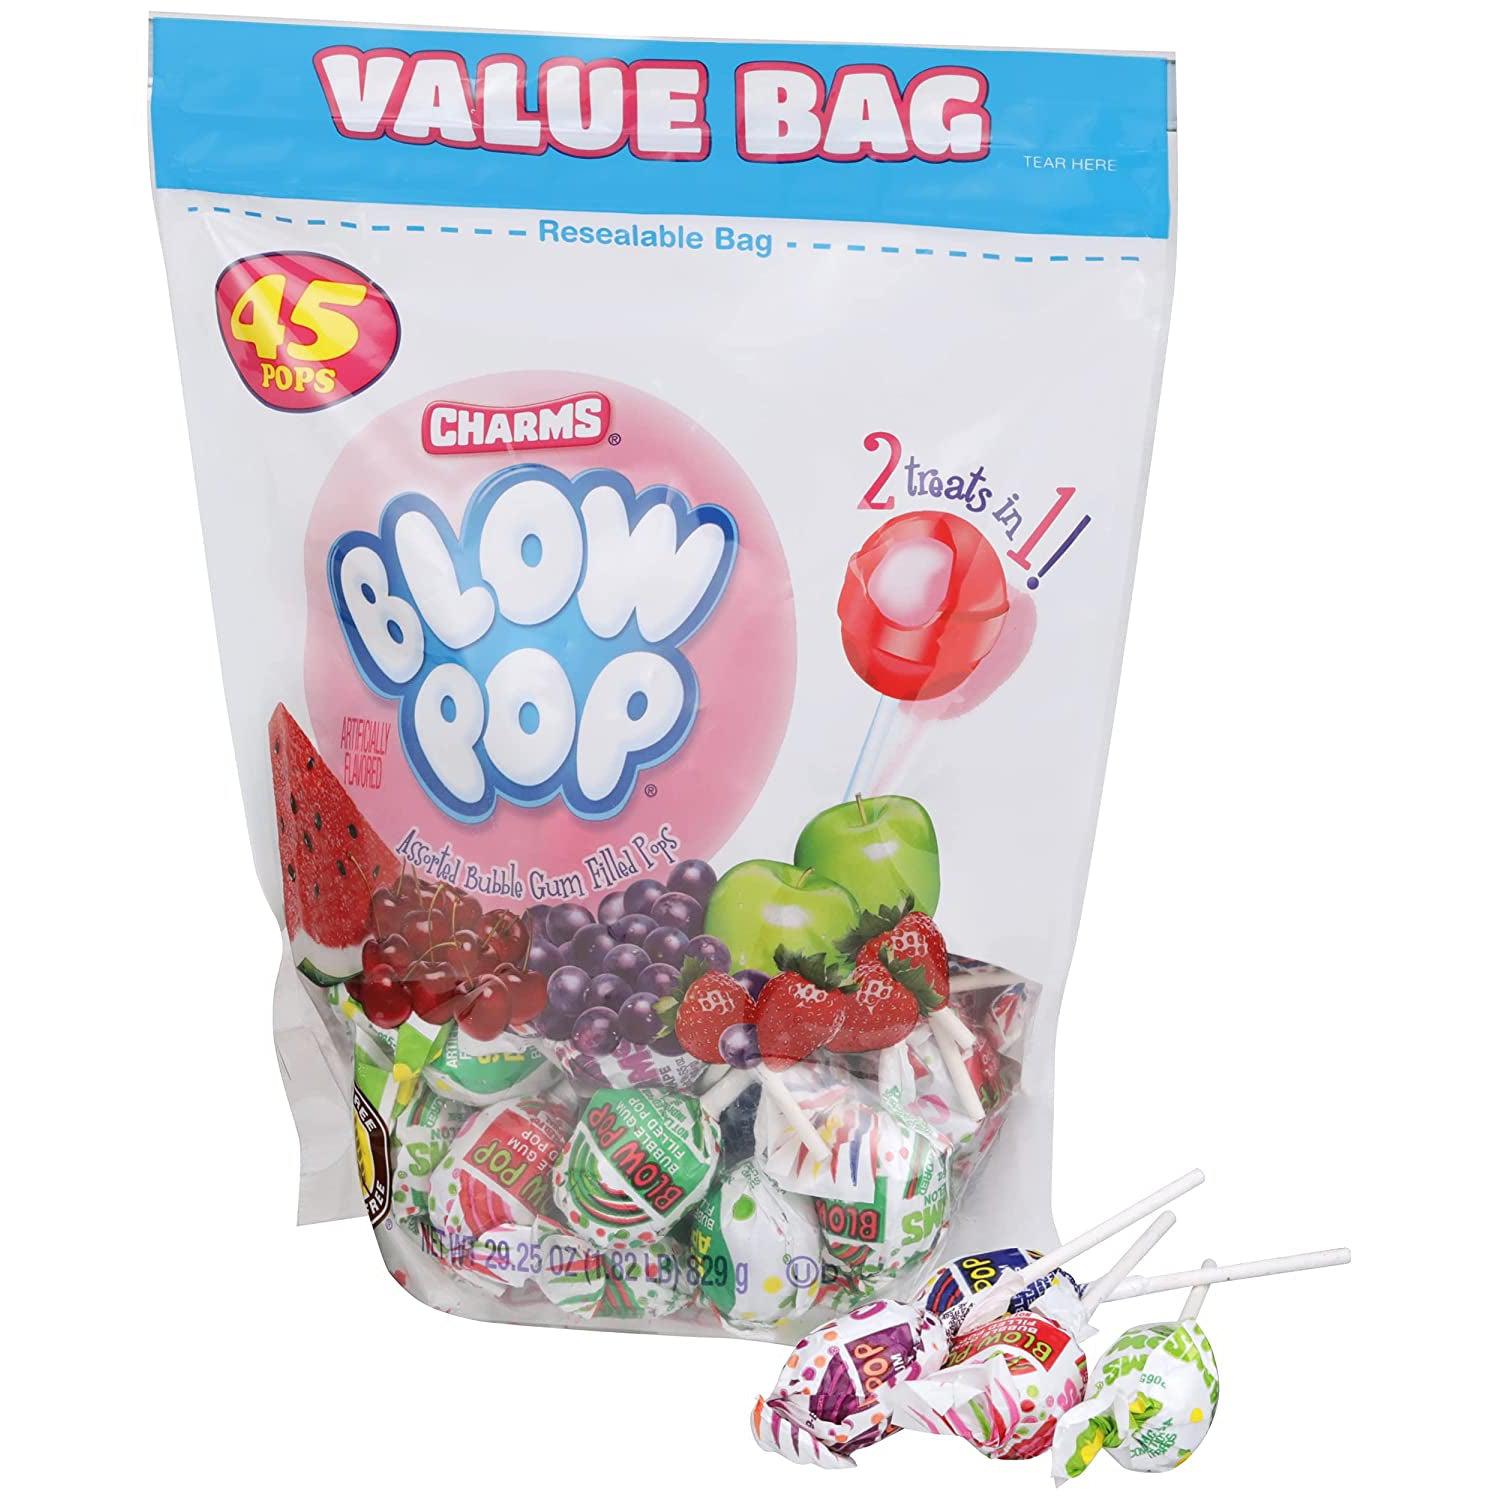 Charms-Charms Blow Pops Assorted Flavors 45 count bag 29.25 oz.--Legacy Toys